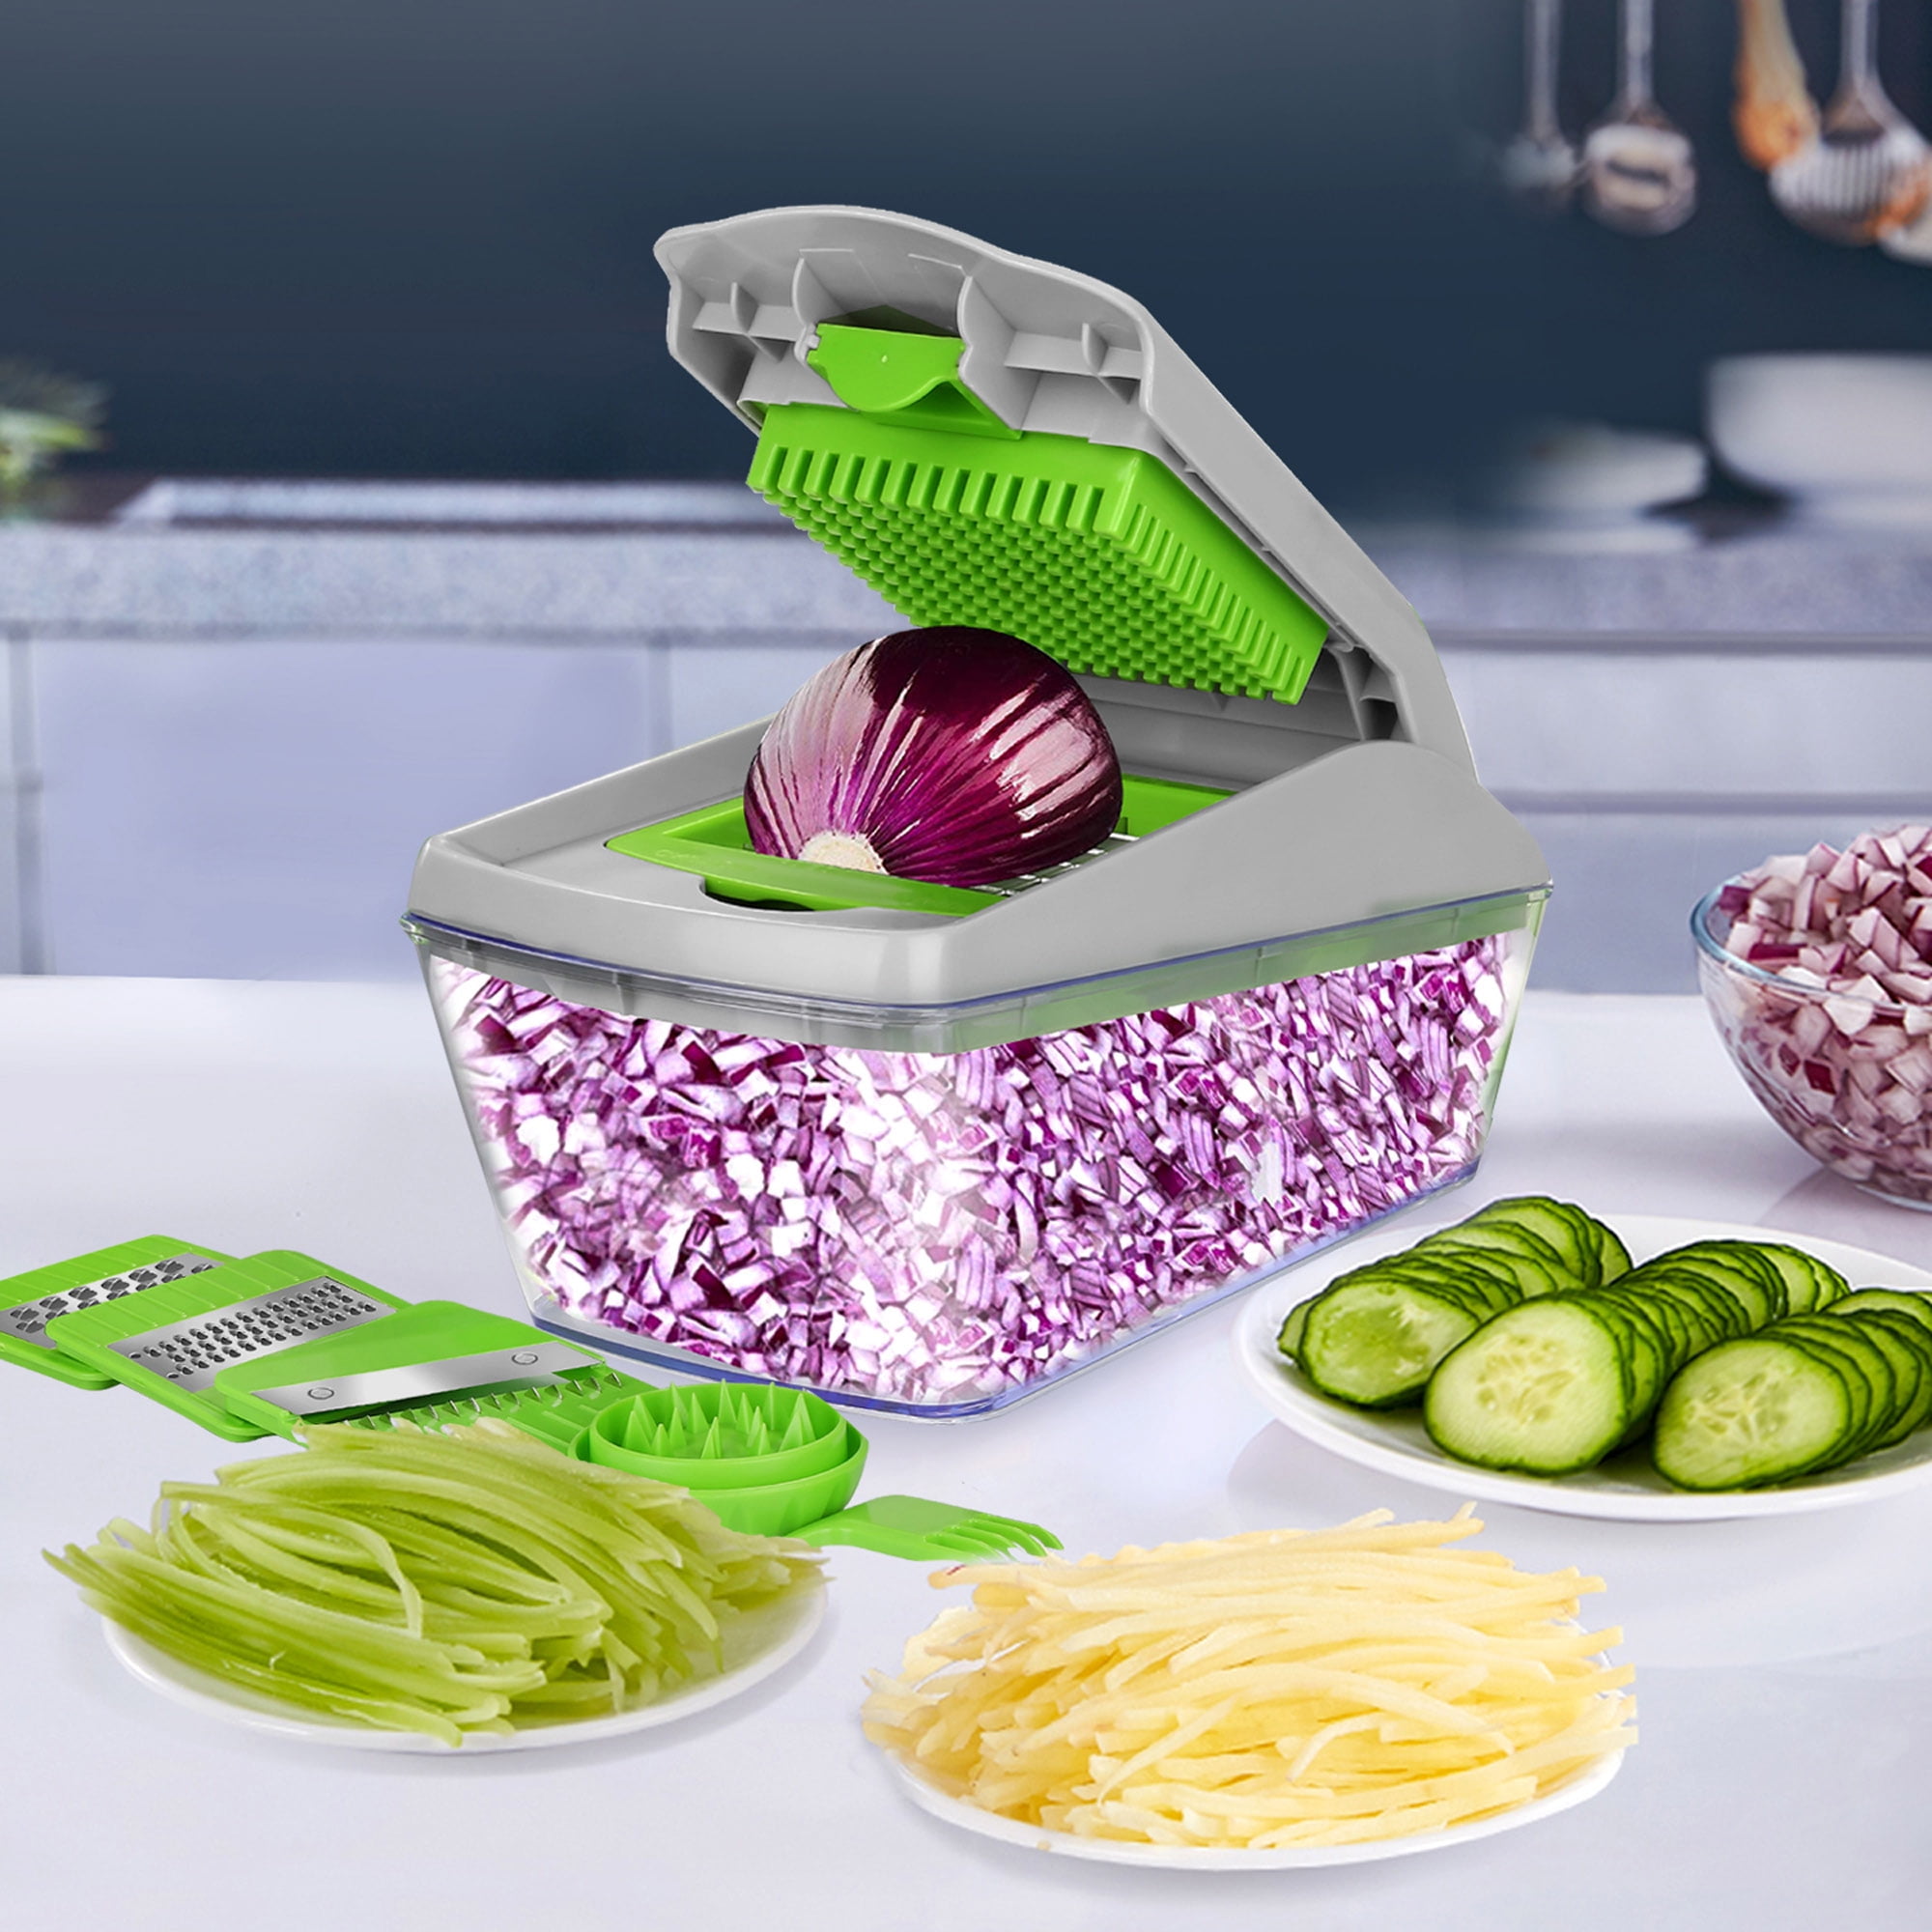 Mandoline Slicer Thickness Adjustable, FITNATE 9 in 1 Vegetable Chopper and  Slicer with 5 Rep, 1 unit - Pay Less Super Markets